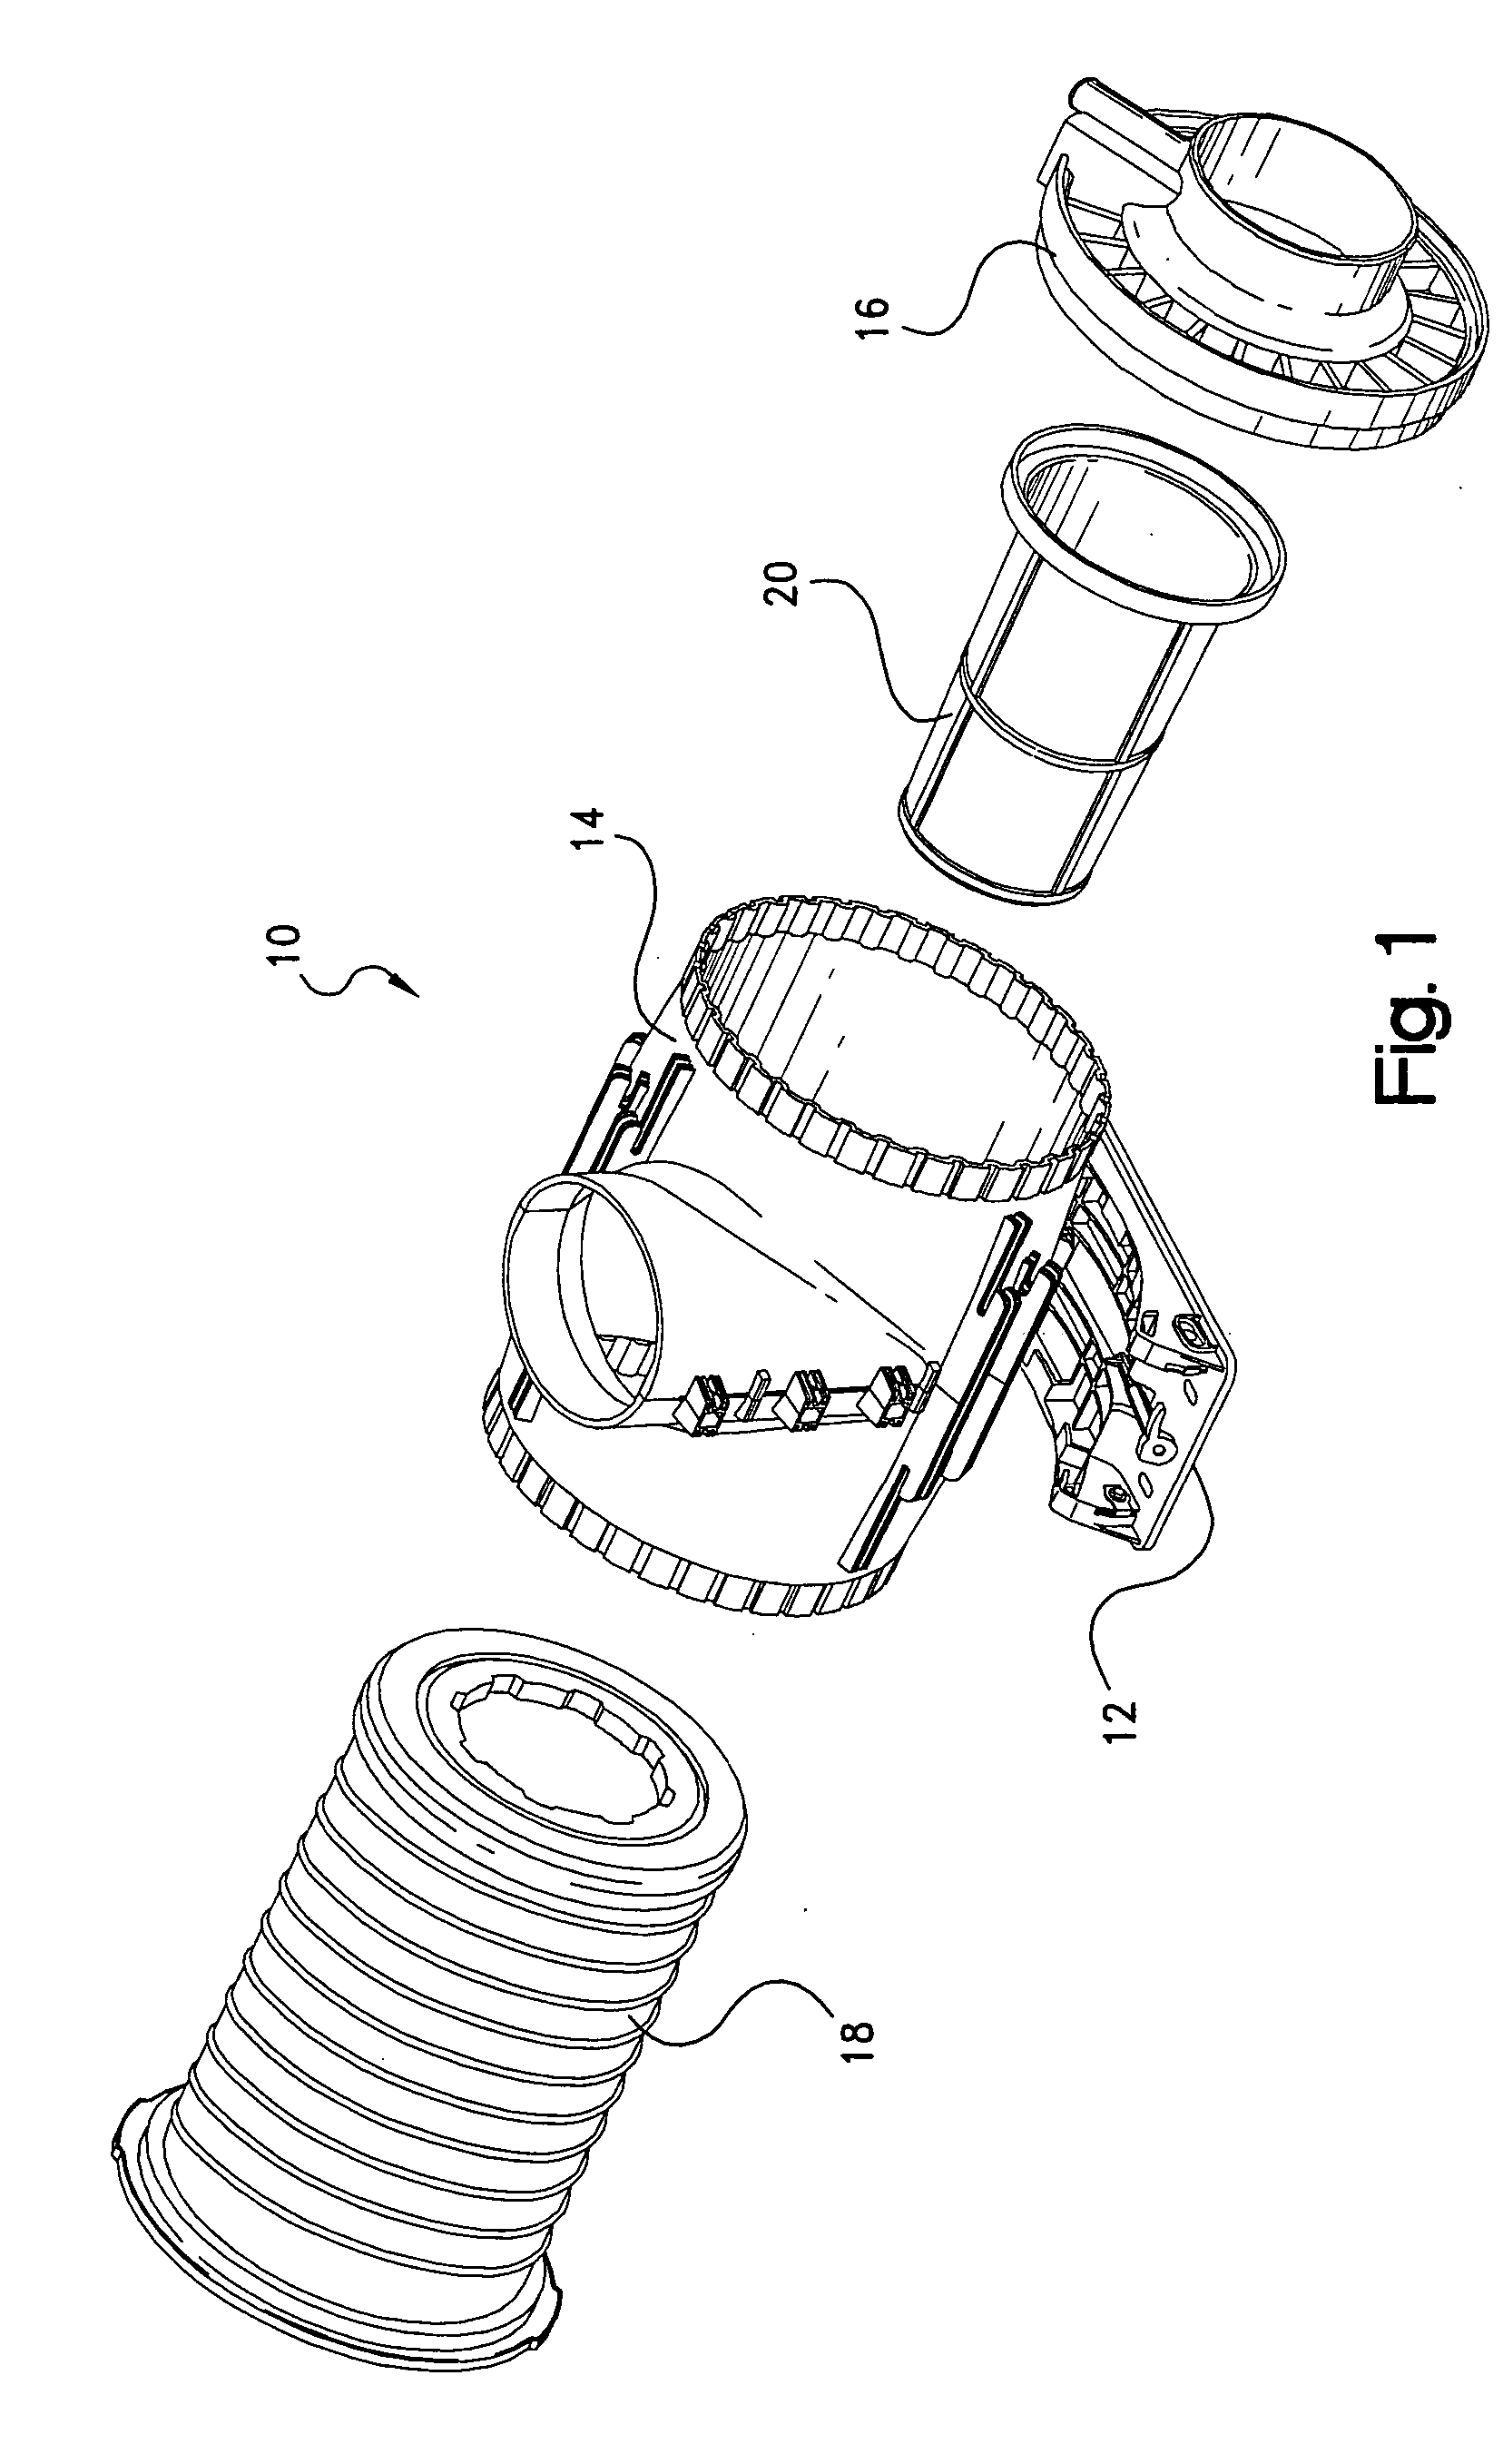 Air filter assembly system and method